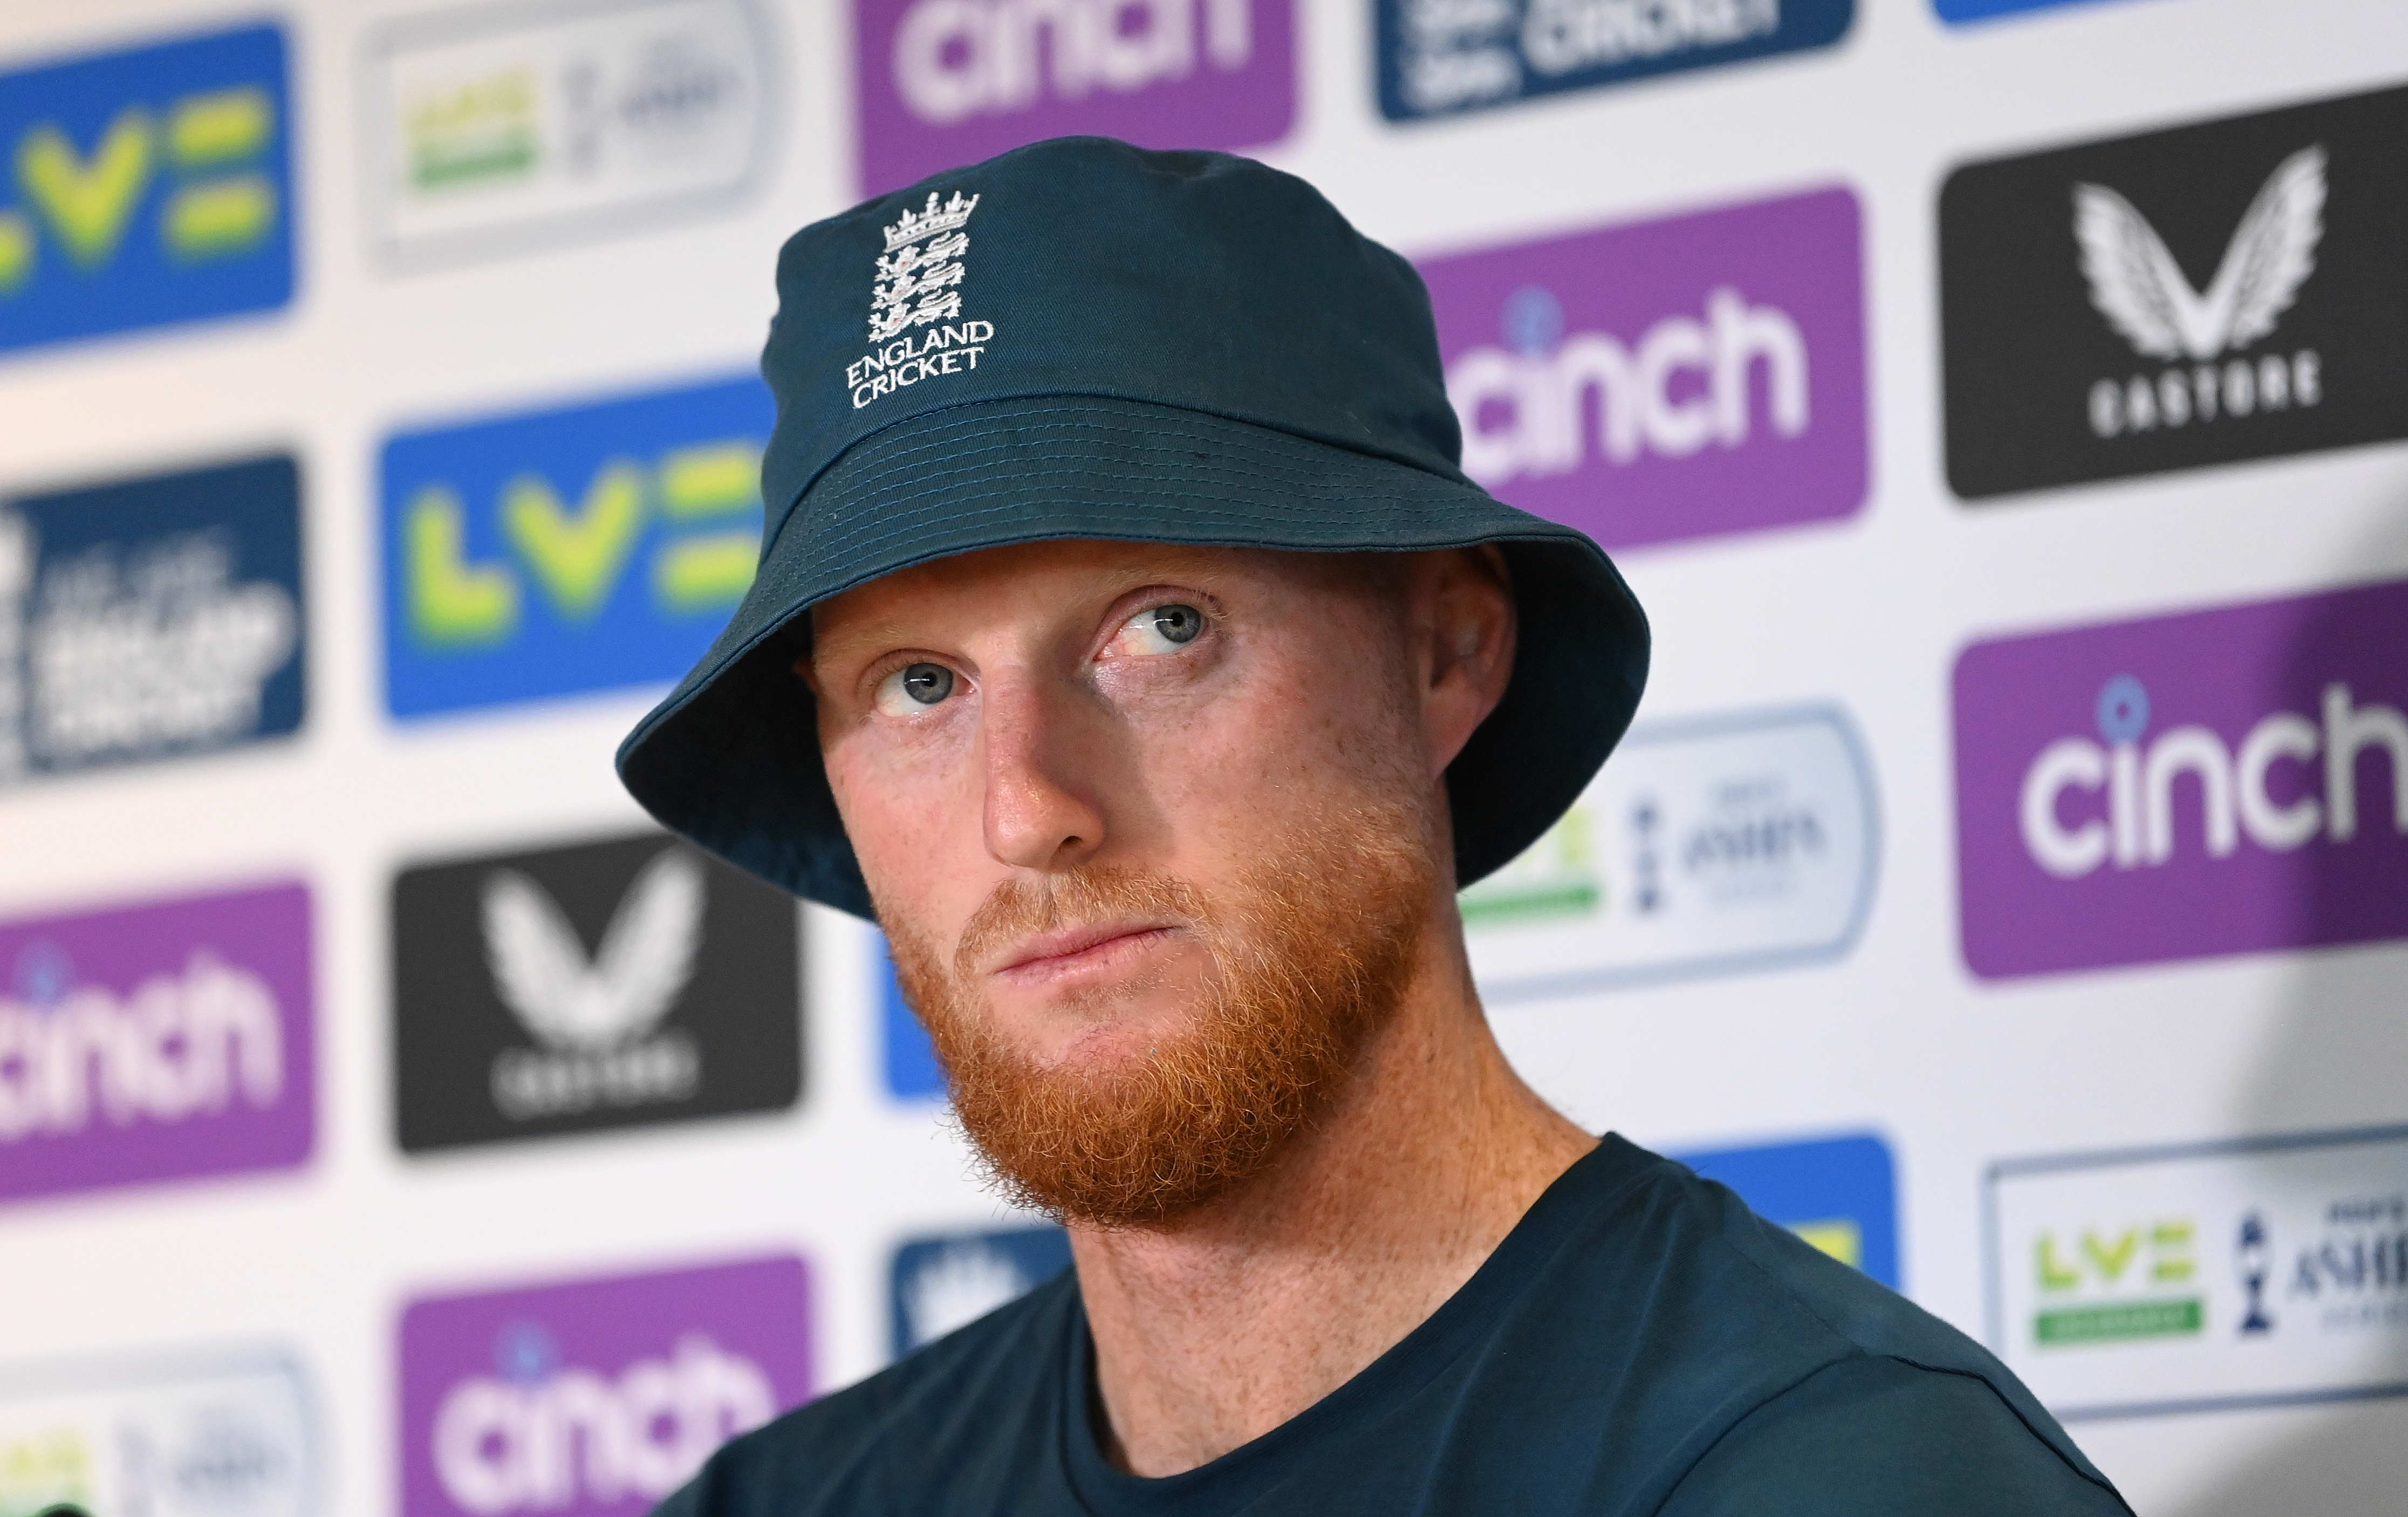 BIRMINGHAM, ENGLAND - JUNE 15: England captain ben Stokes faces the media at a press conference during England nets ahead of the Ashes Test Match against Australia at Edgbaston on June 15, 2023 in Birmingham, England. (Photo by Stu Forster/Getty Images)